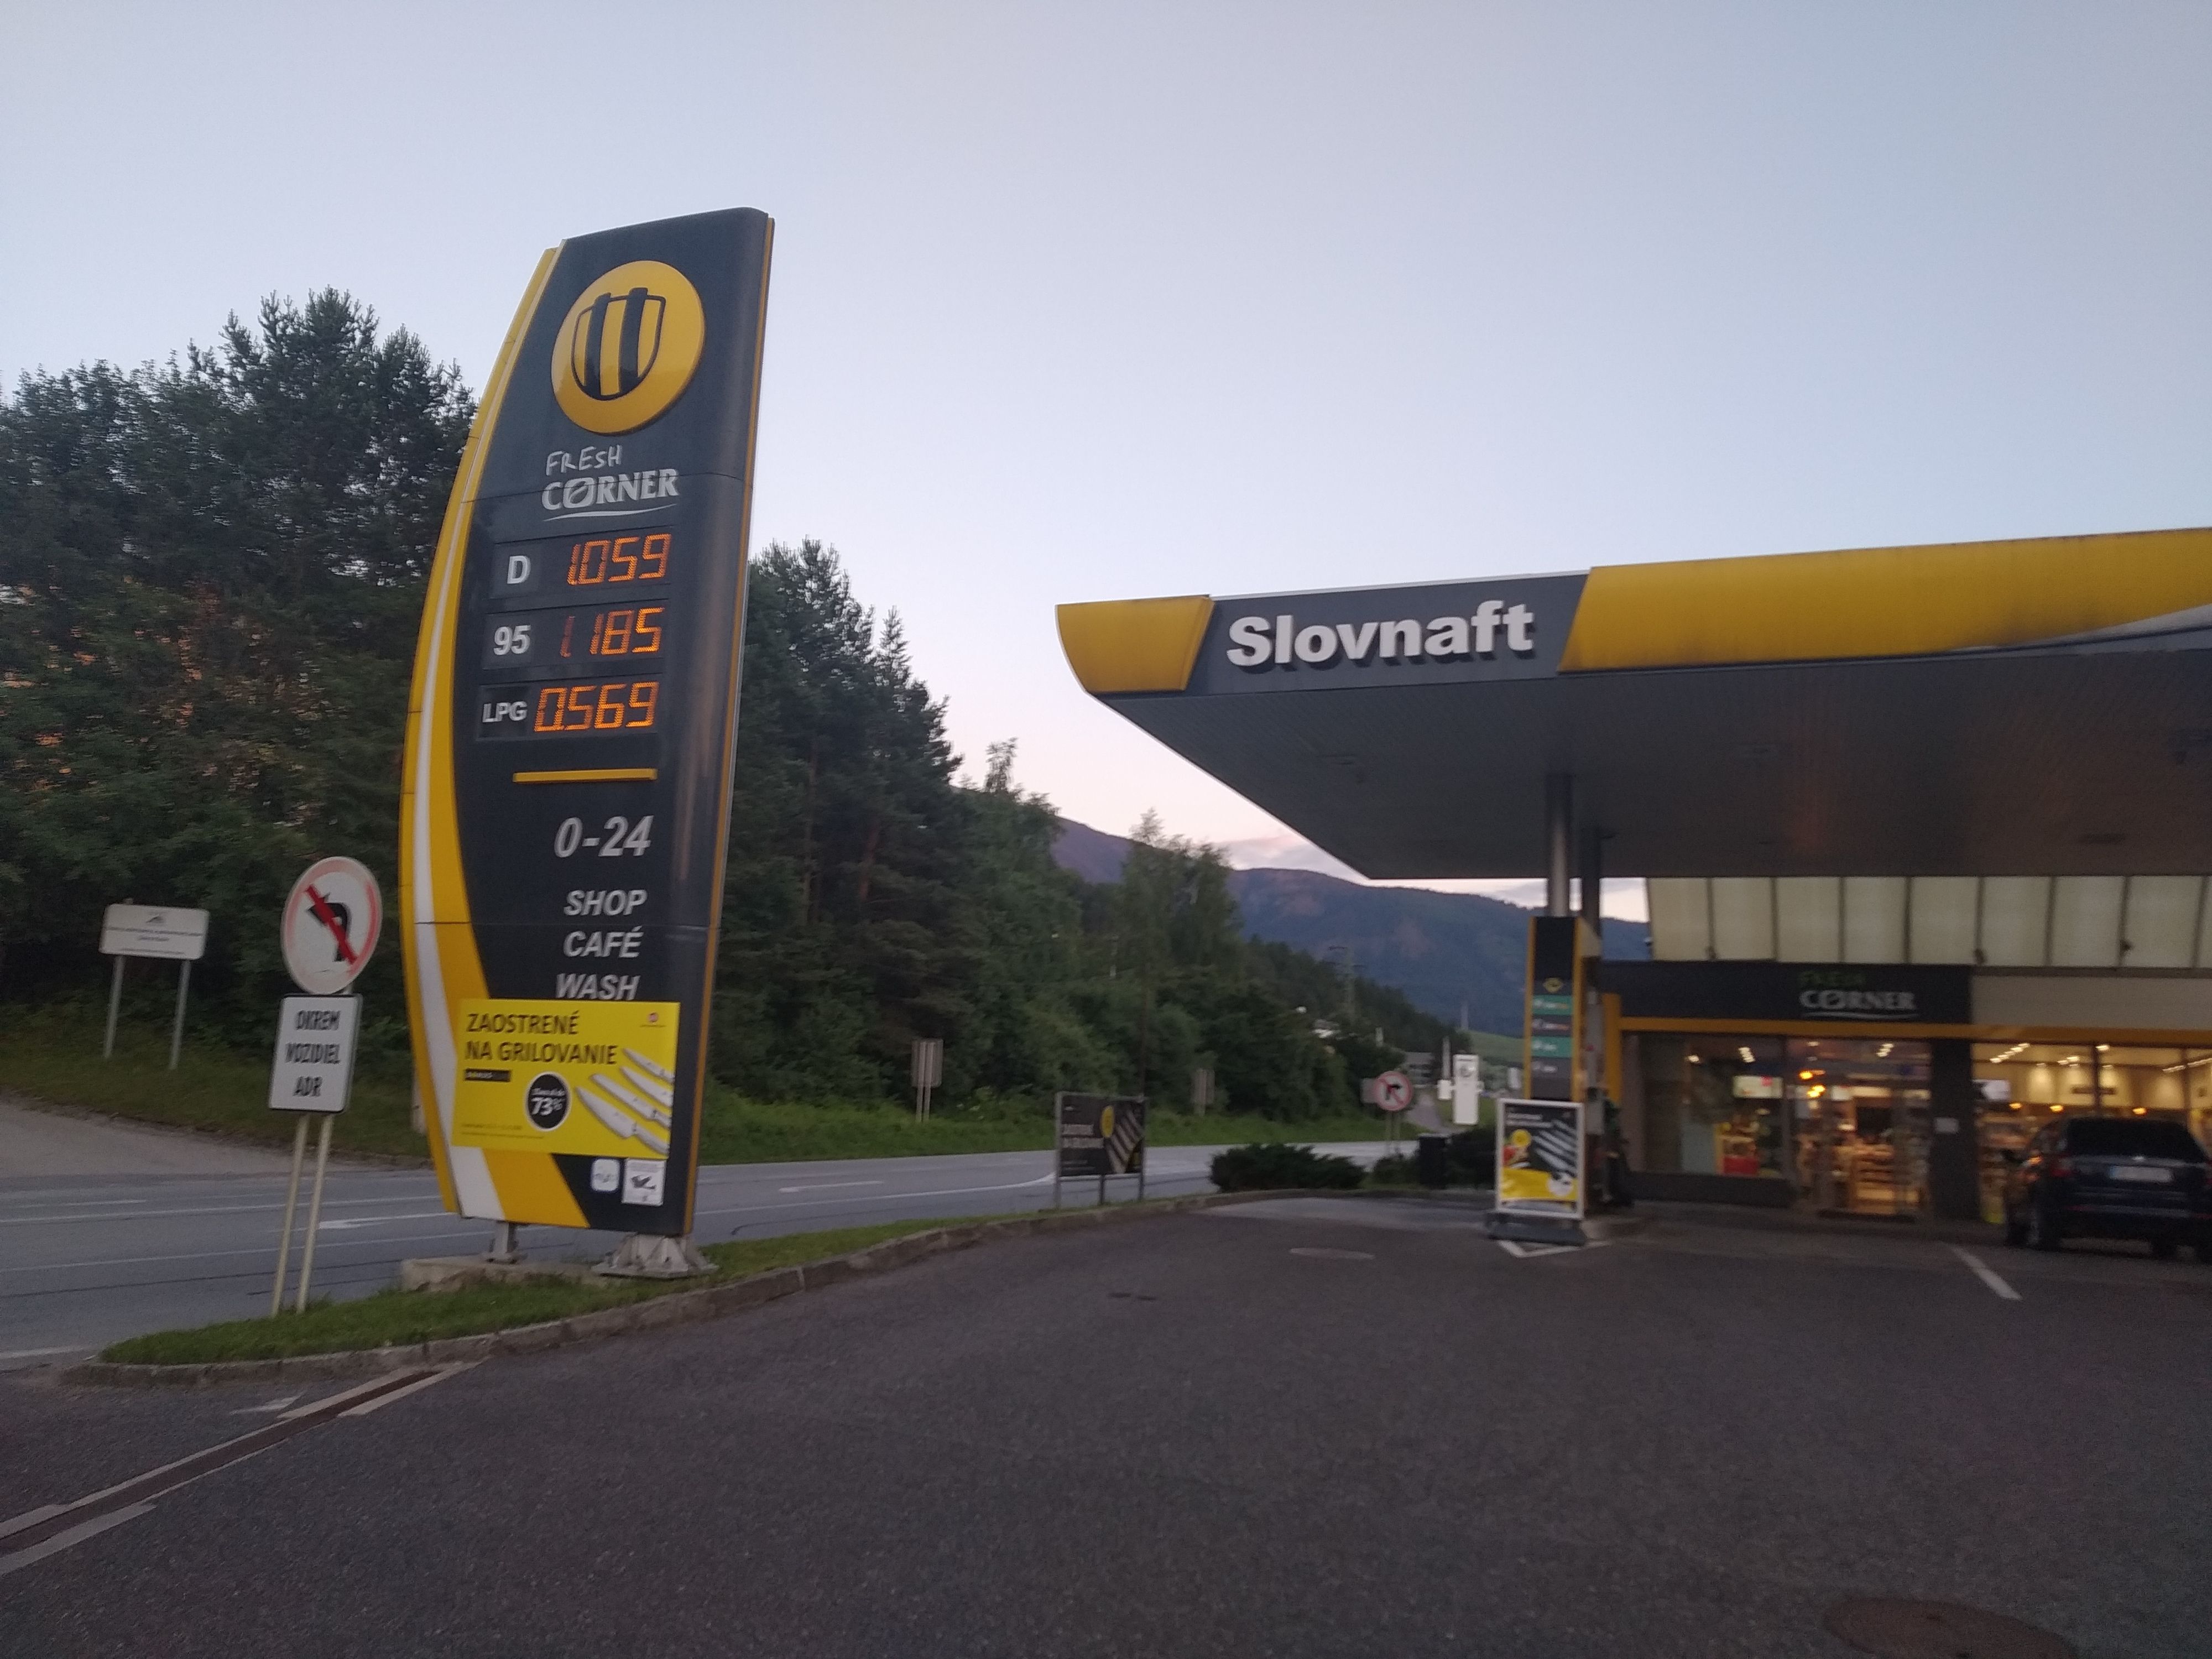 Our favourite gas station